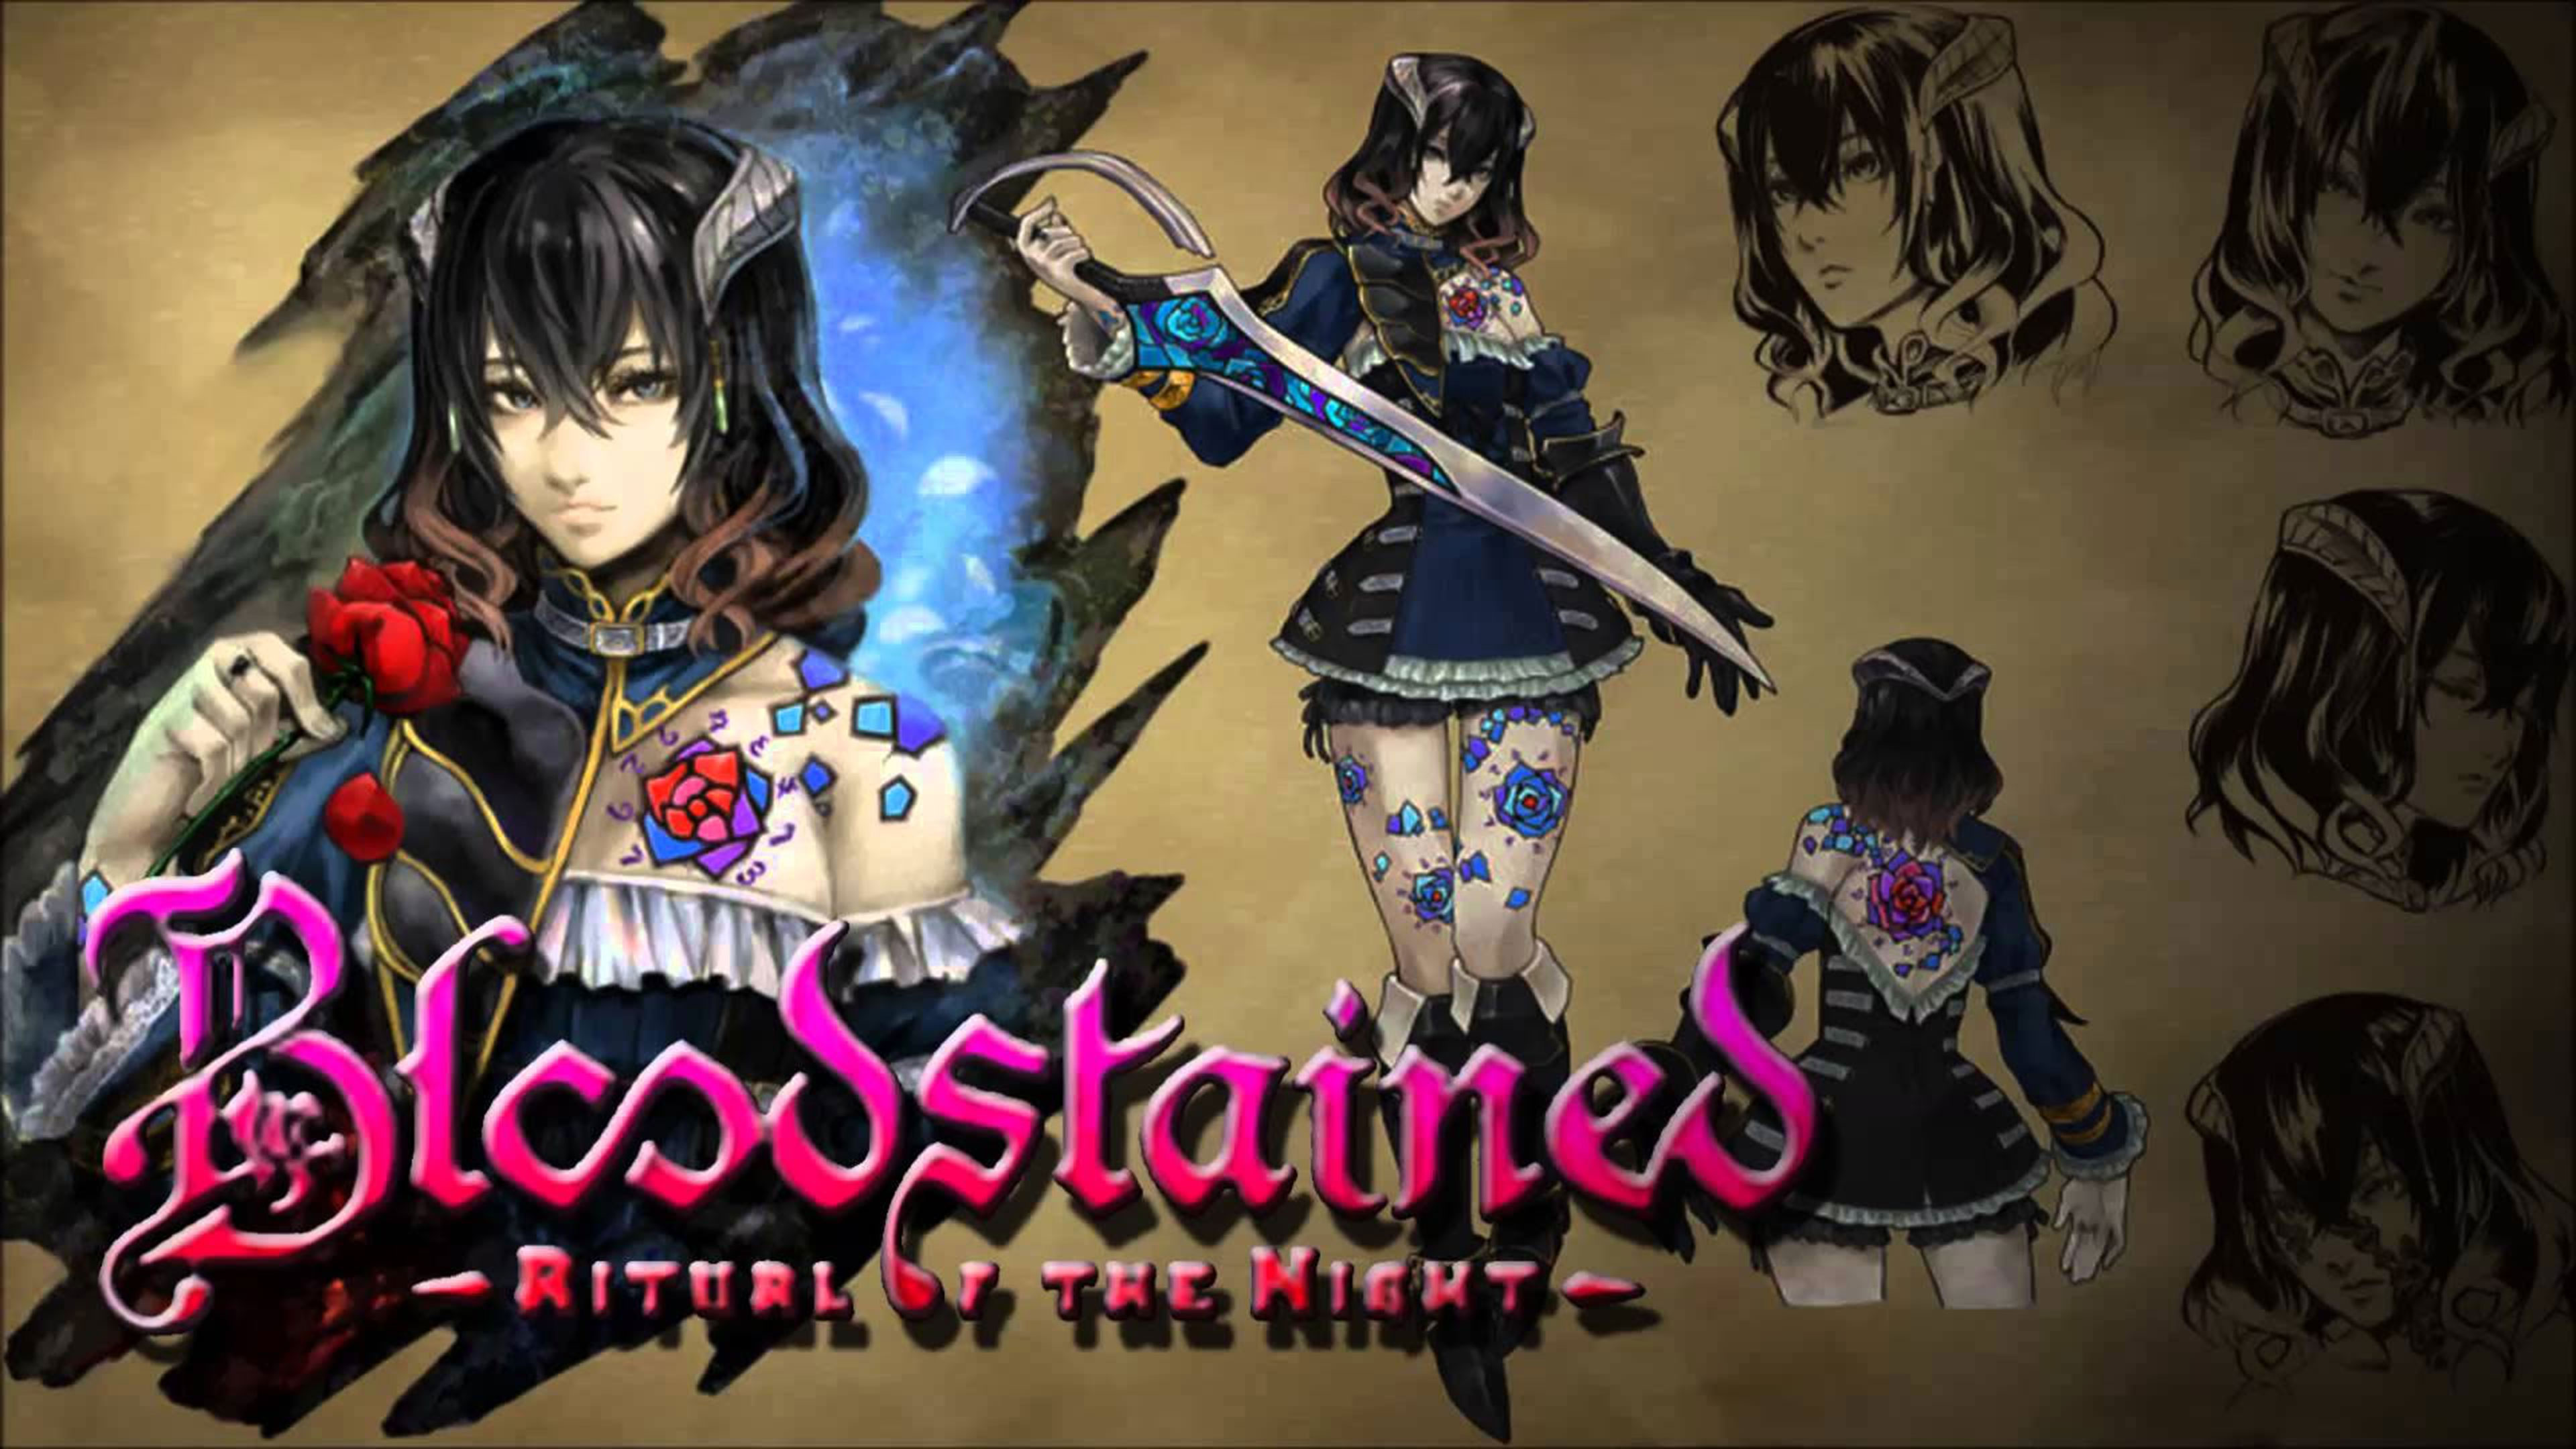 Bloodstained: Ritual of the Night Wallpapers in Ultra HD | 4K - Gameranx